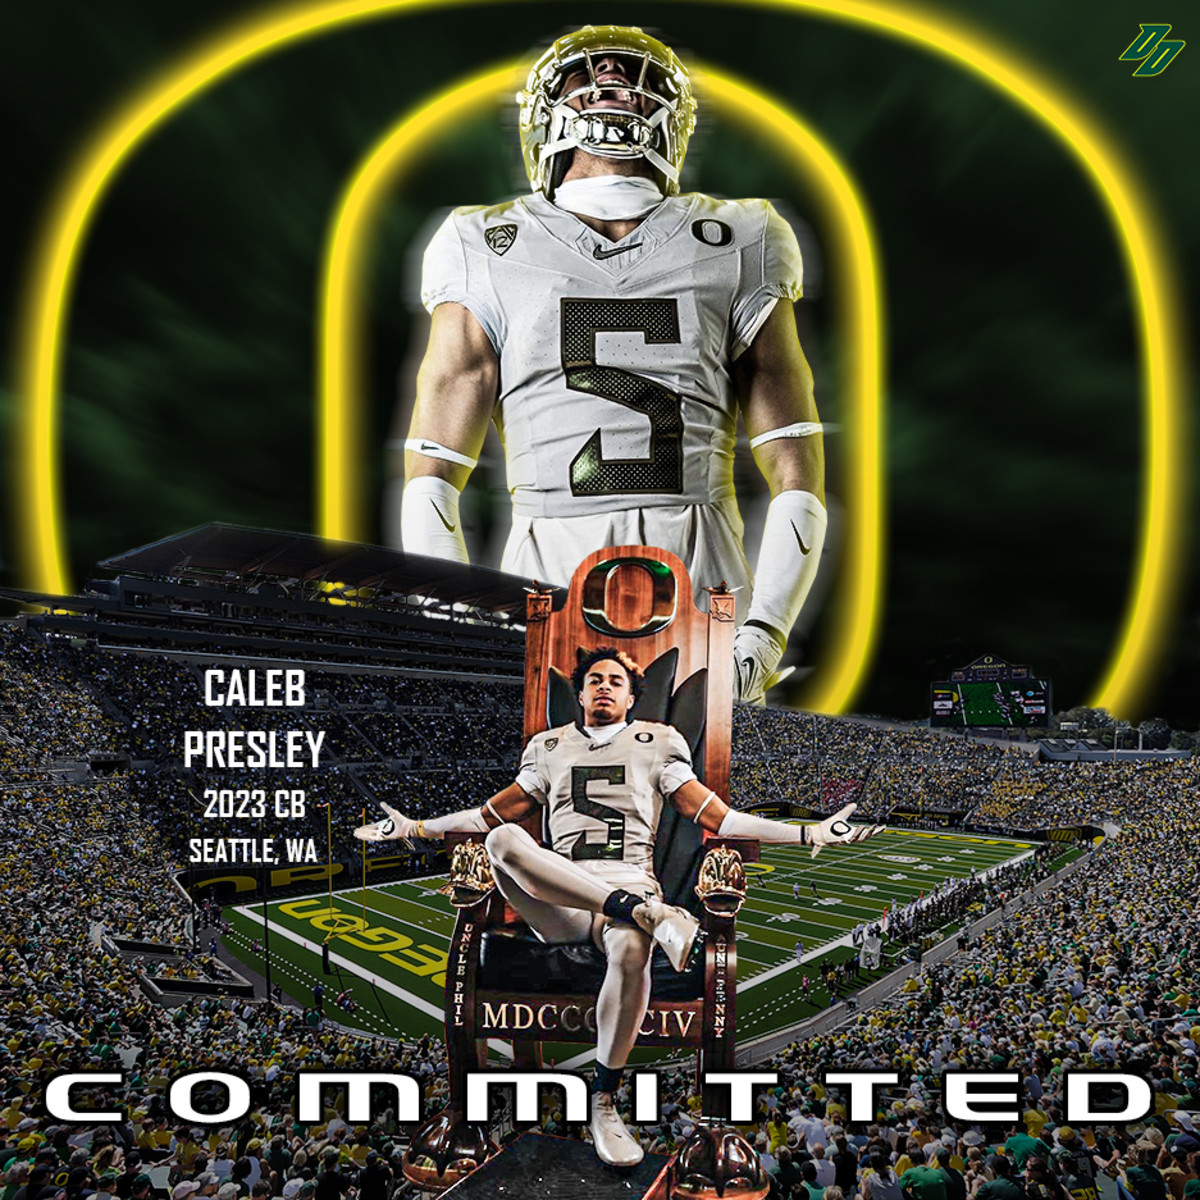 Caleb Presley is the highest-rated defensive back to commit to Oregon since Dontae Manning in 2020.